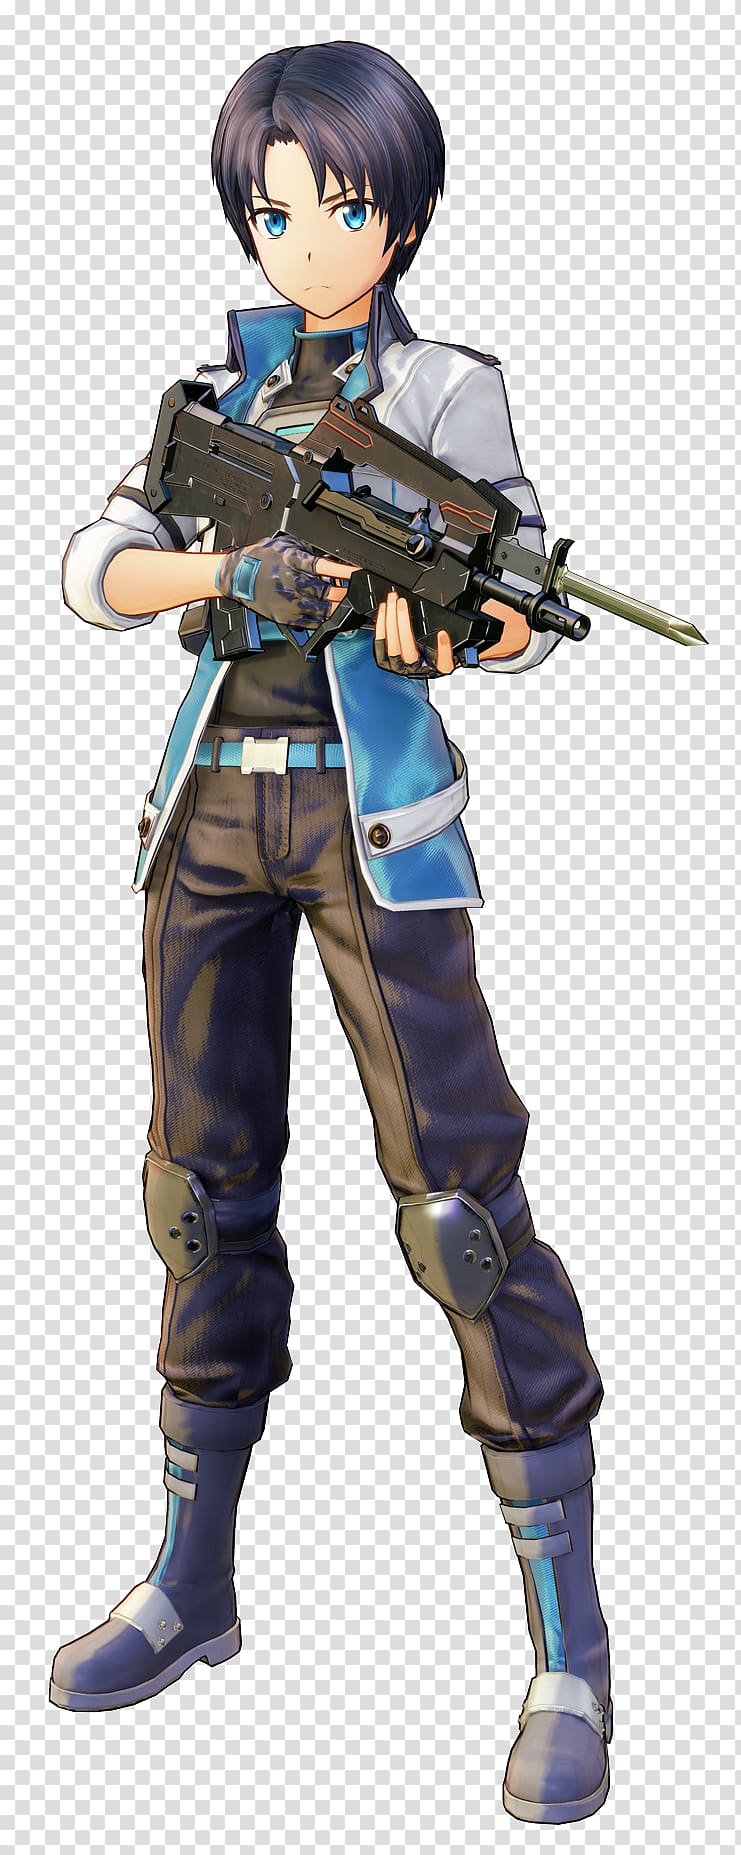 Sword Art Online: Fatal Bullet Leafa Character Kirito, others transparent background PNG clipart